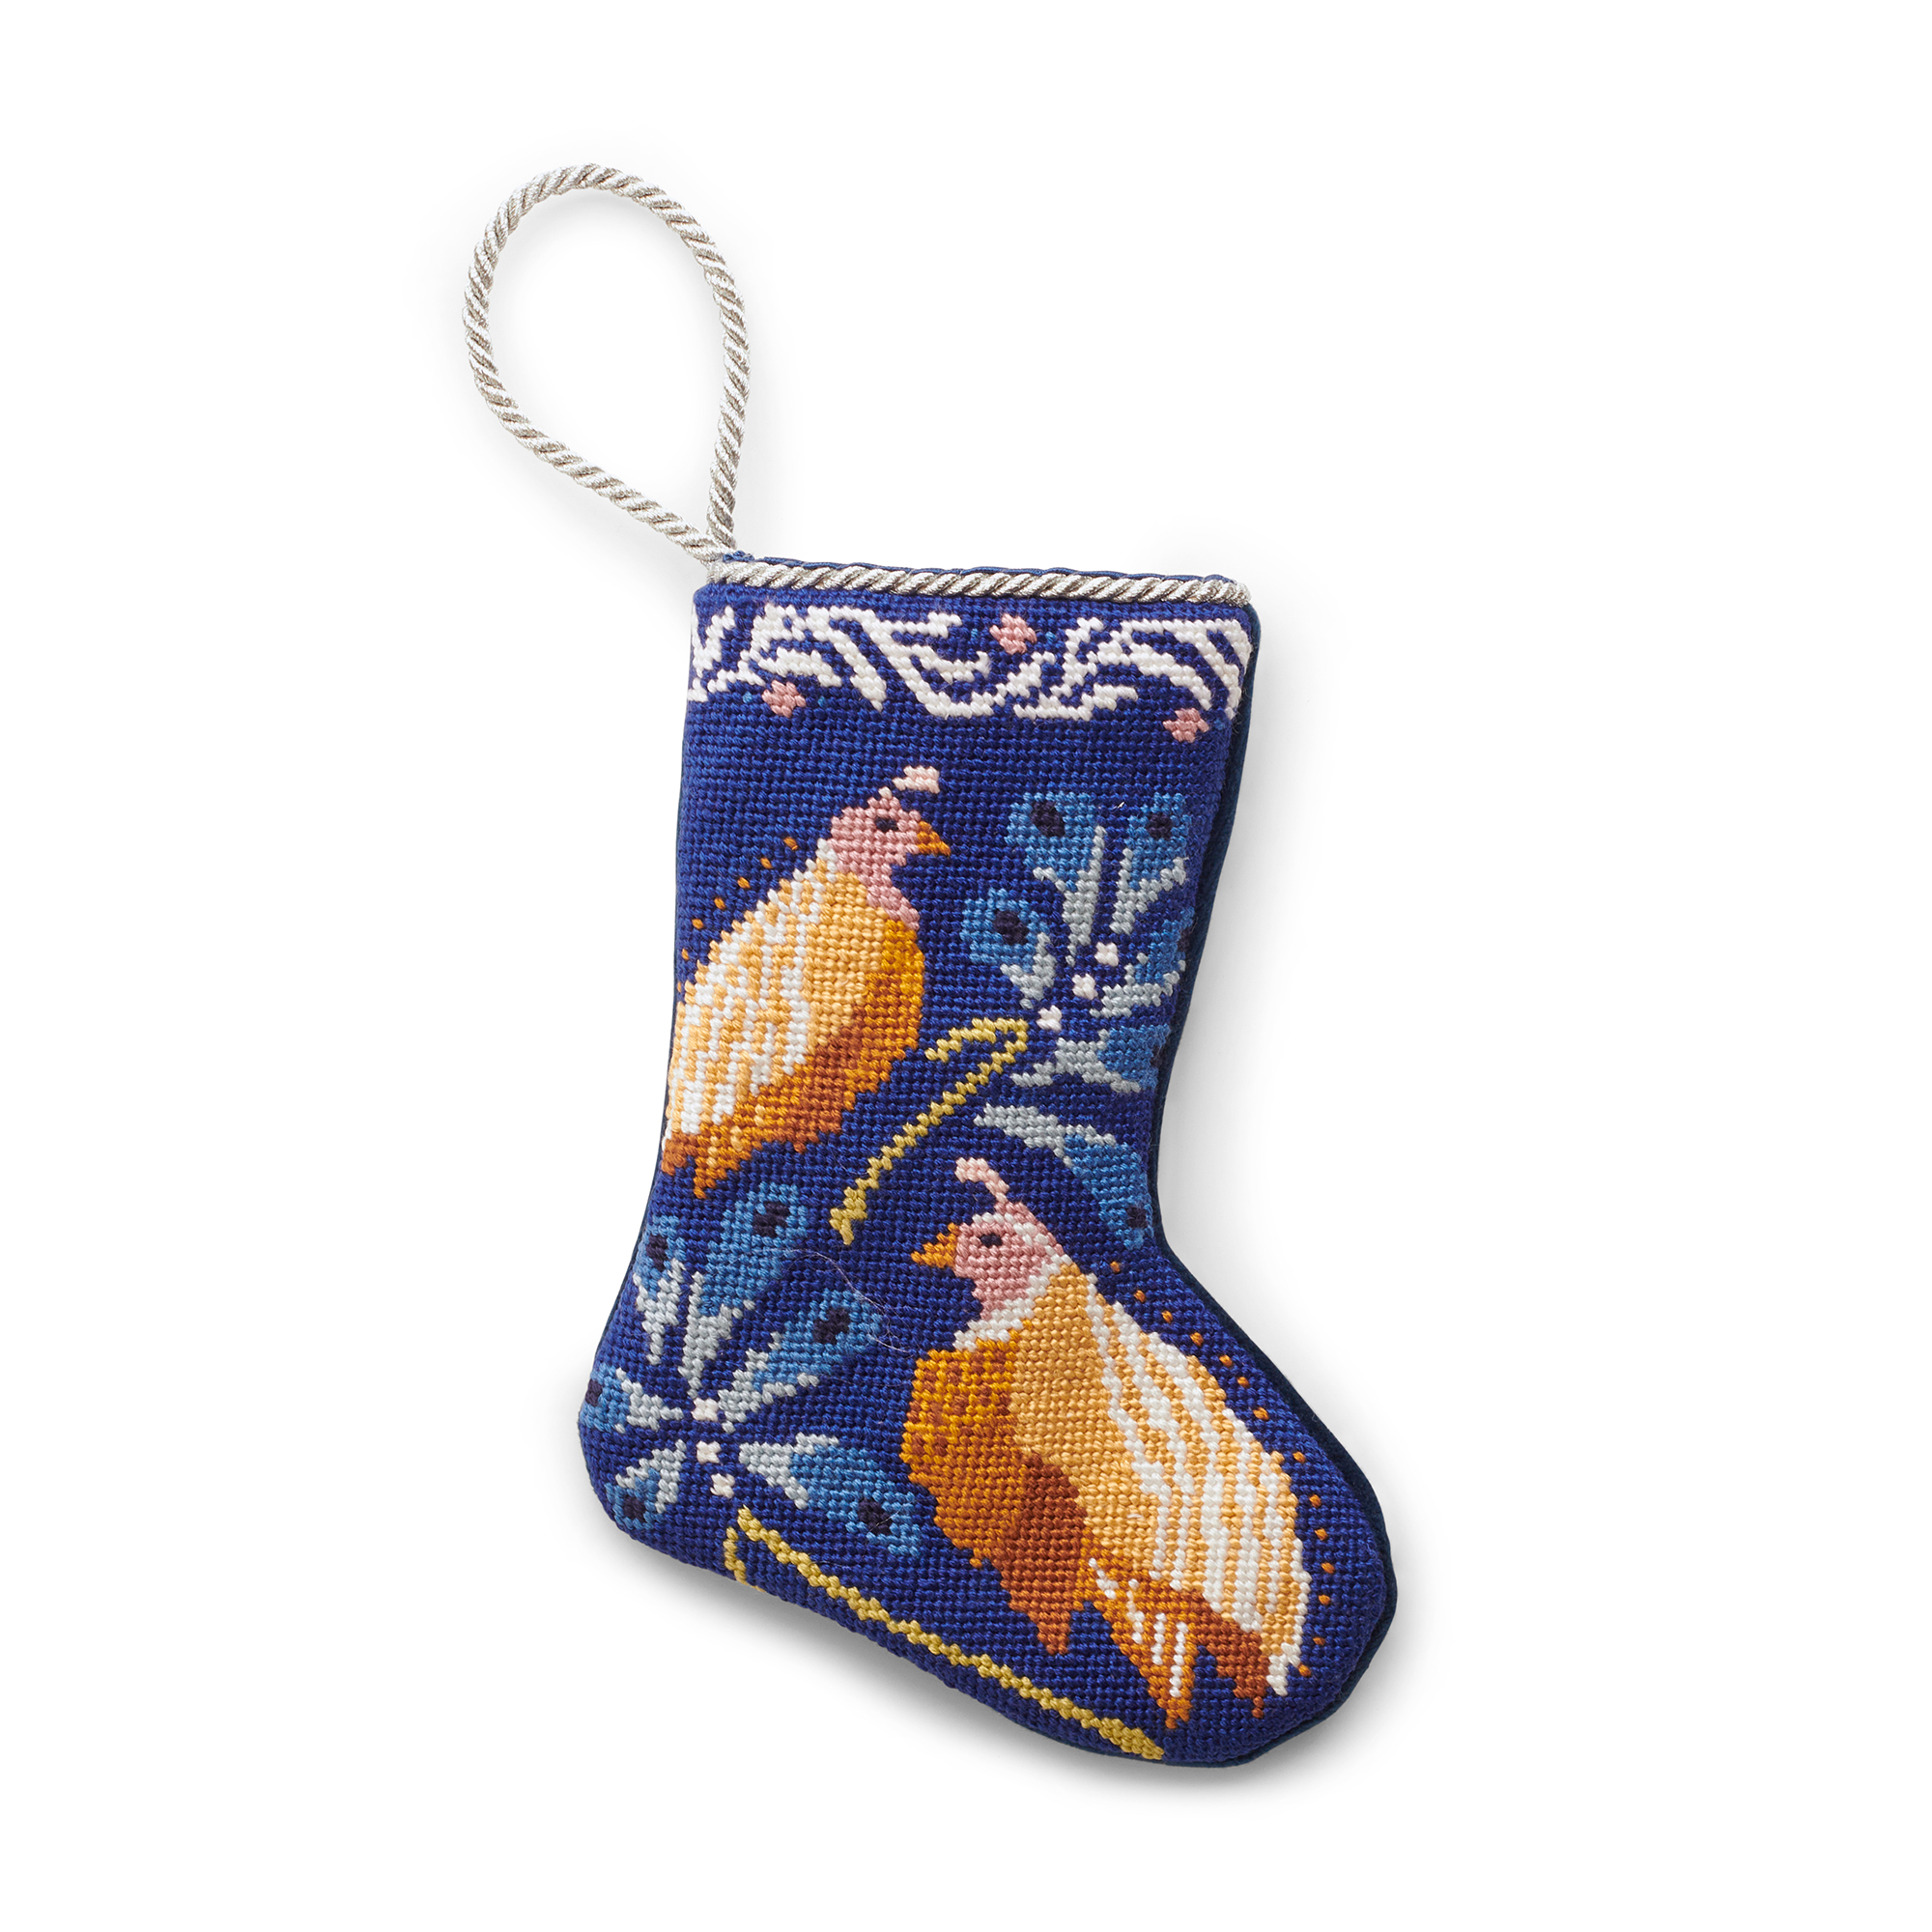 A charming Christmas stocking, featuring an illustrated two birds contrasted to the dark blue  background. A gold loop at the top, is making it perfect as tree ornament, place setting, or for hanging by the fireplace.